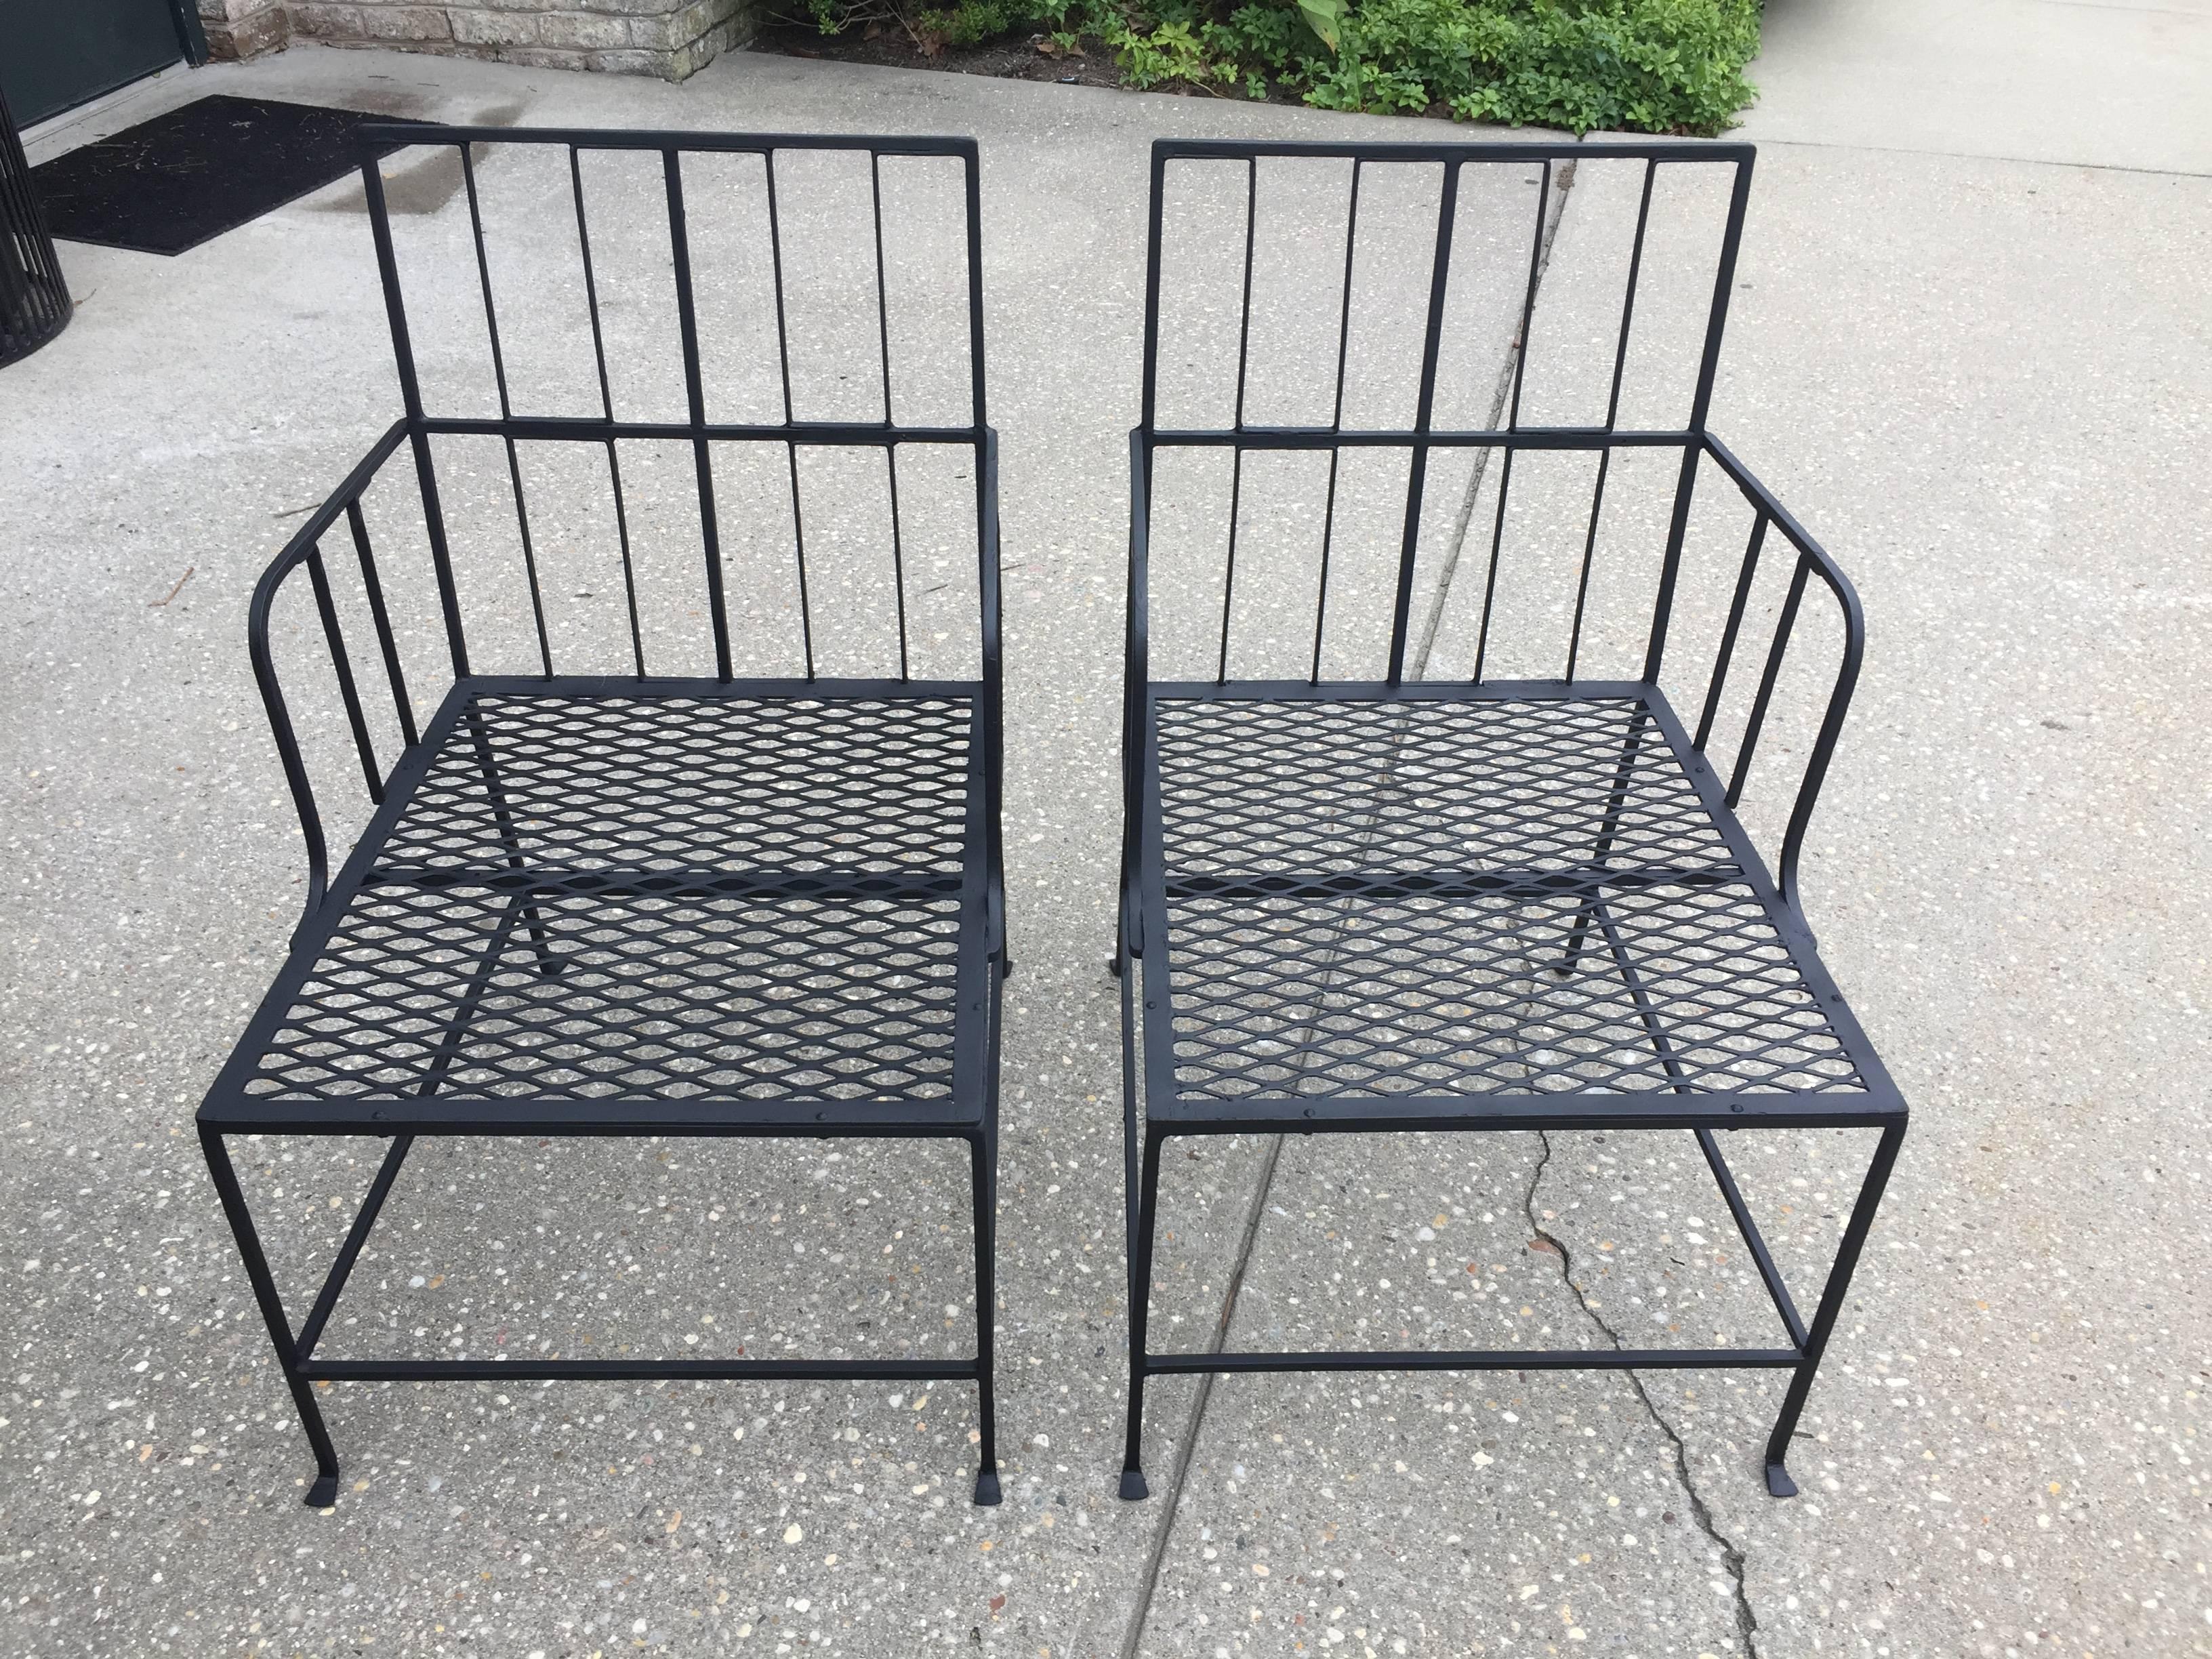 These are a sleek matte black pair of iron chairs with a simple white seat cushion. You can add a splash of fun in your choice of back pillow yourself! Details abound from the feet to the simple Art Deco design.